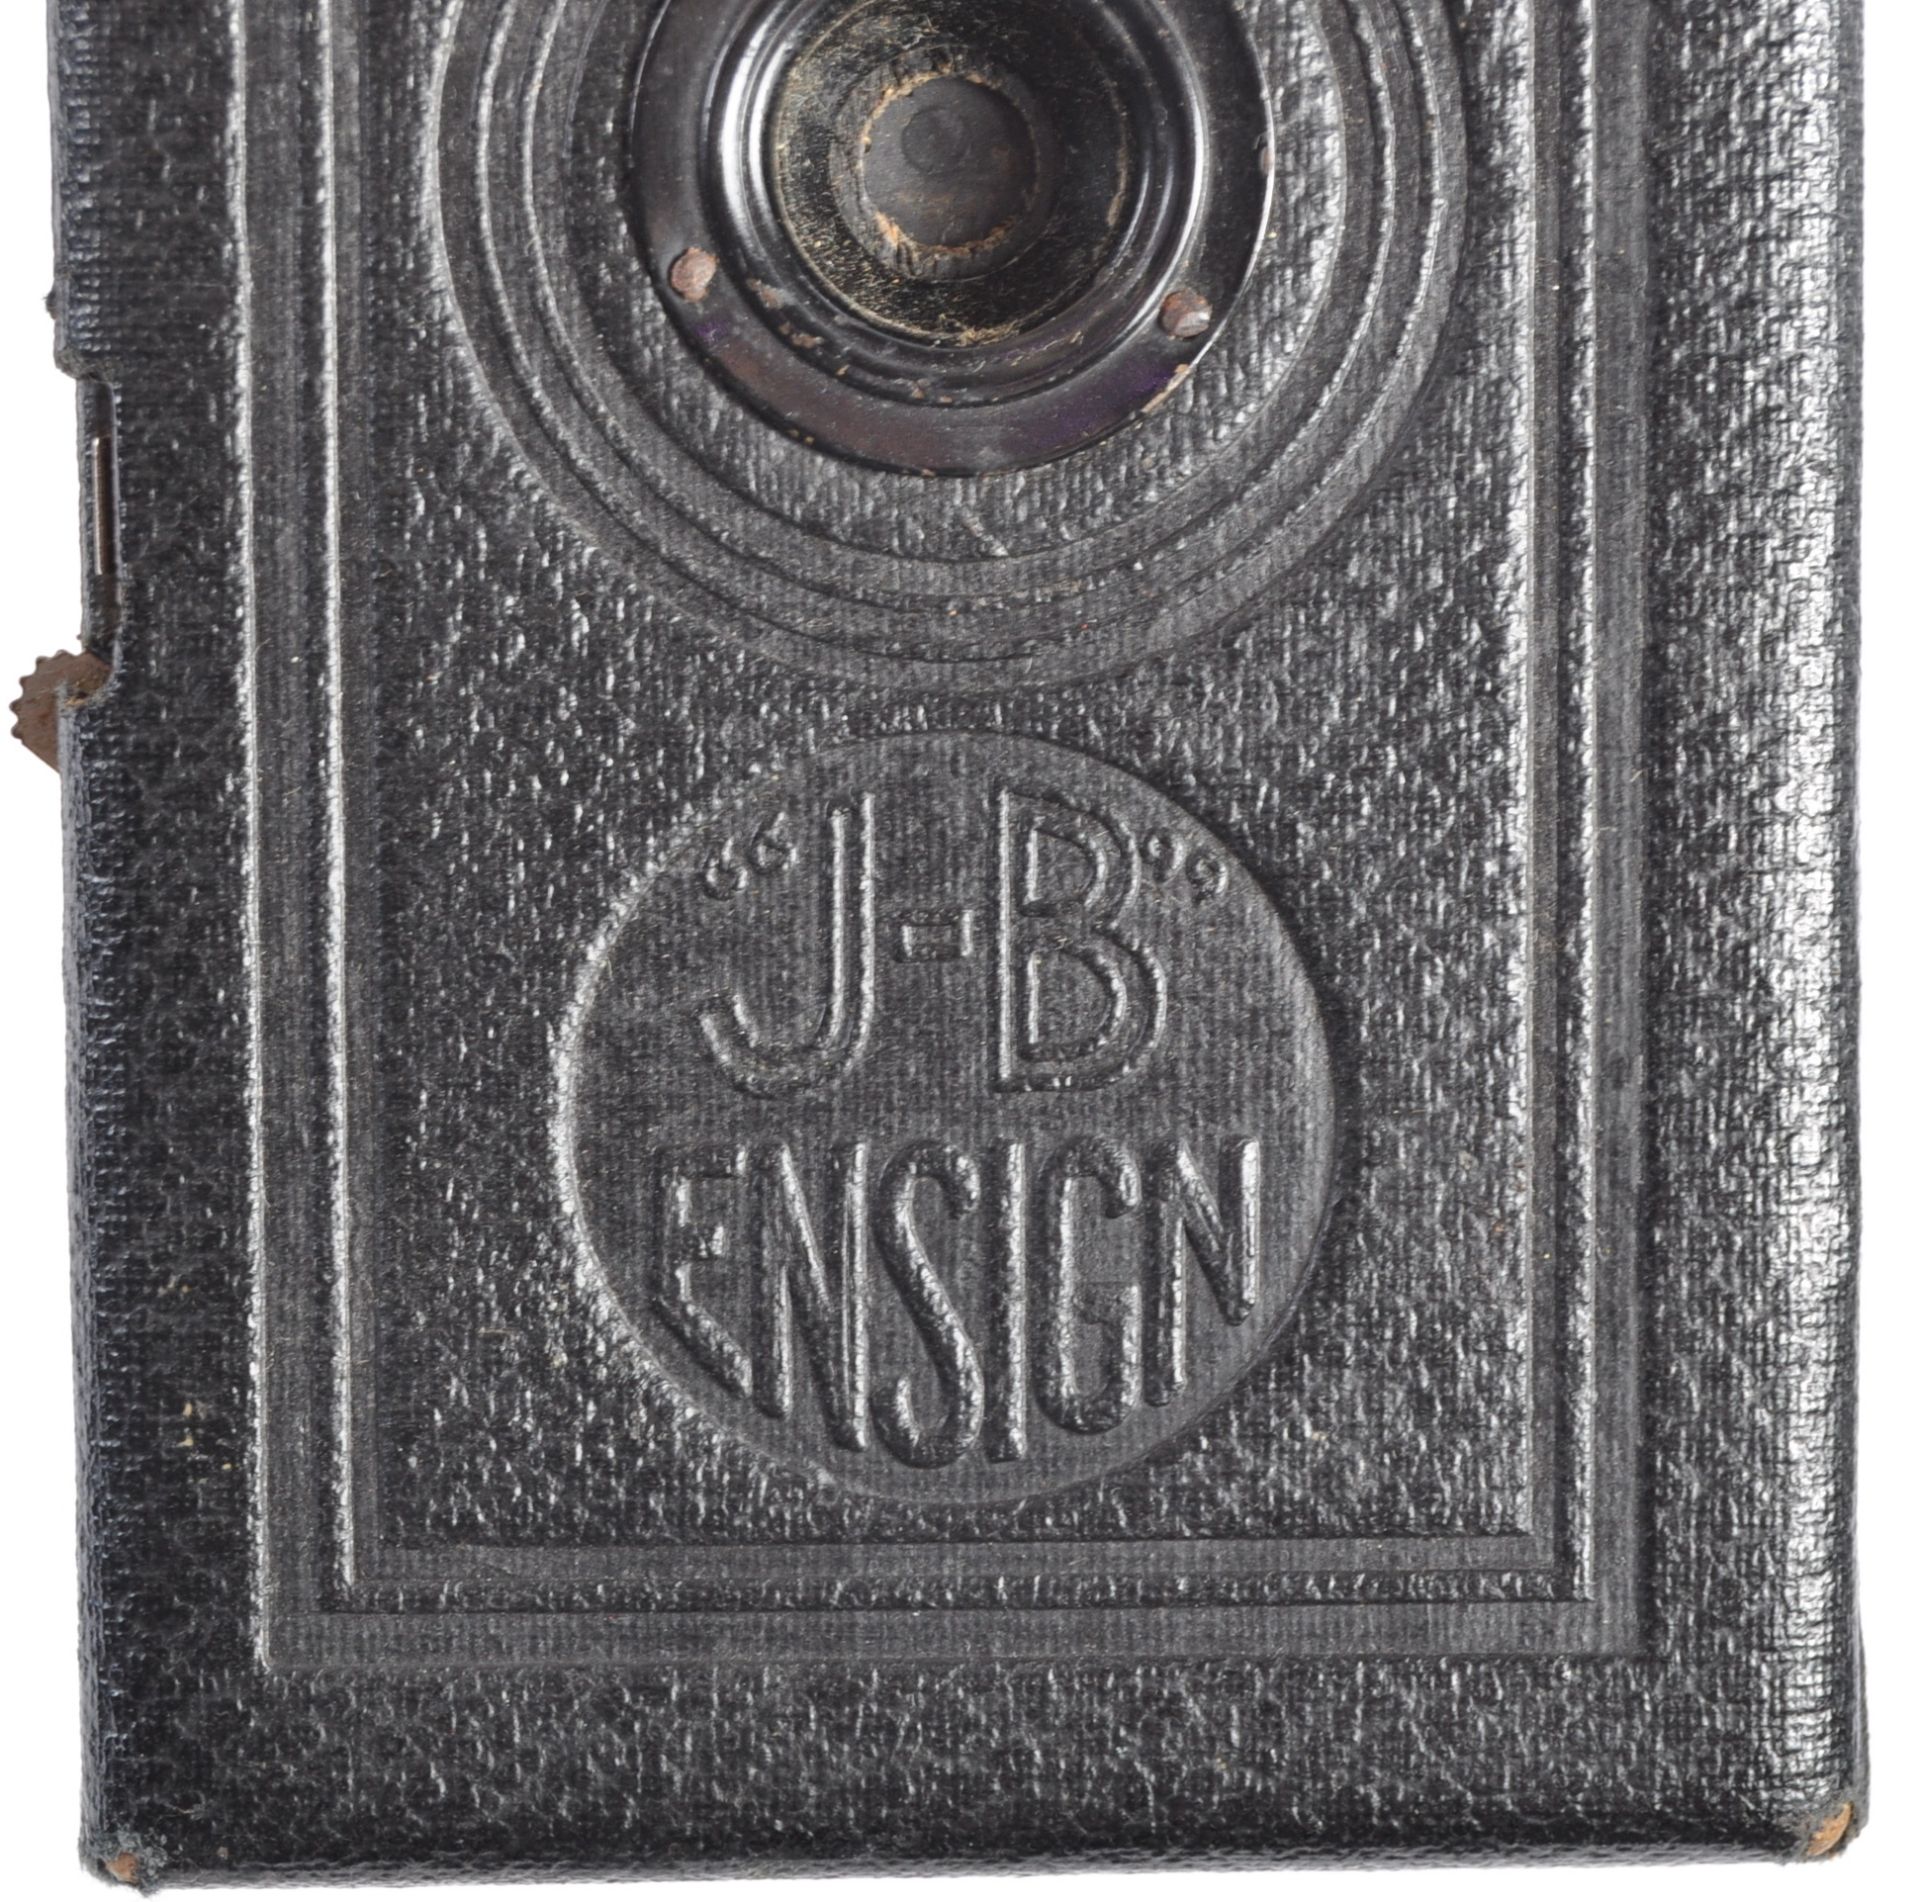 WWI FIRST WORLD WAR MEDAL PAIR & CAMERA - PRIVATE IN GLOUCESTER RGMT - Image 6 of 6